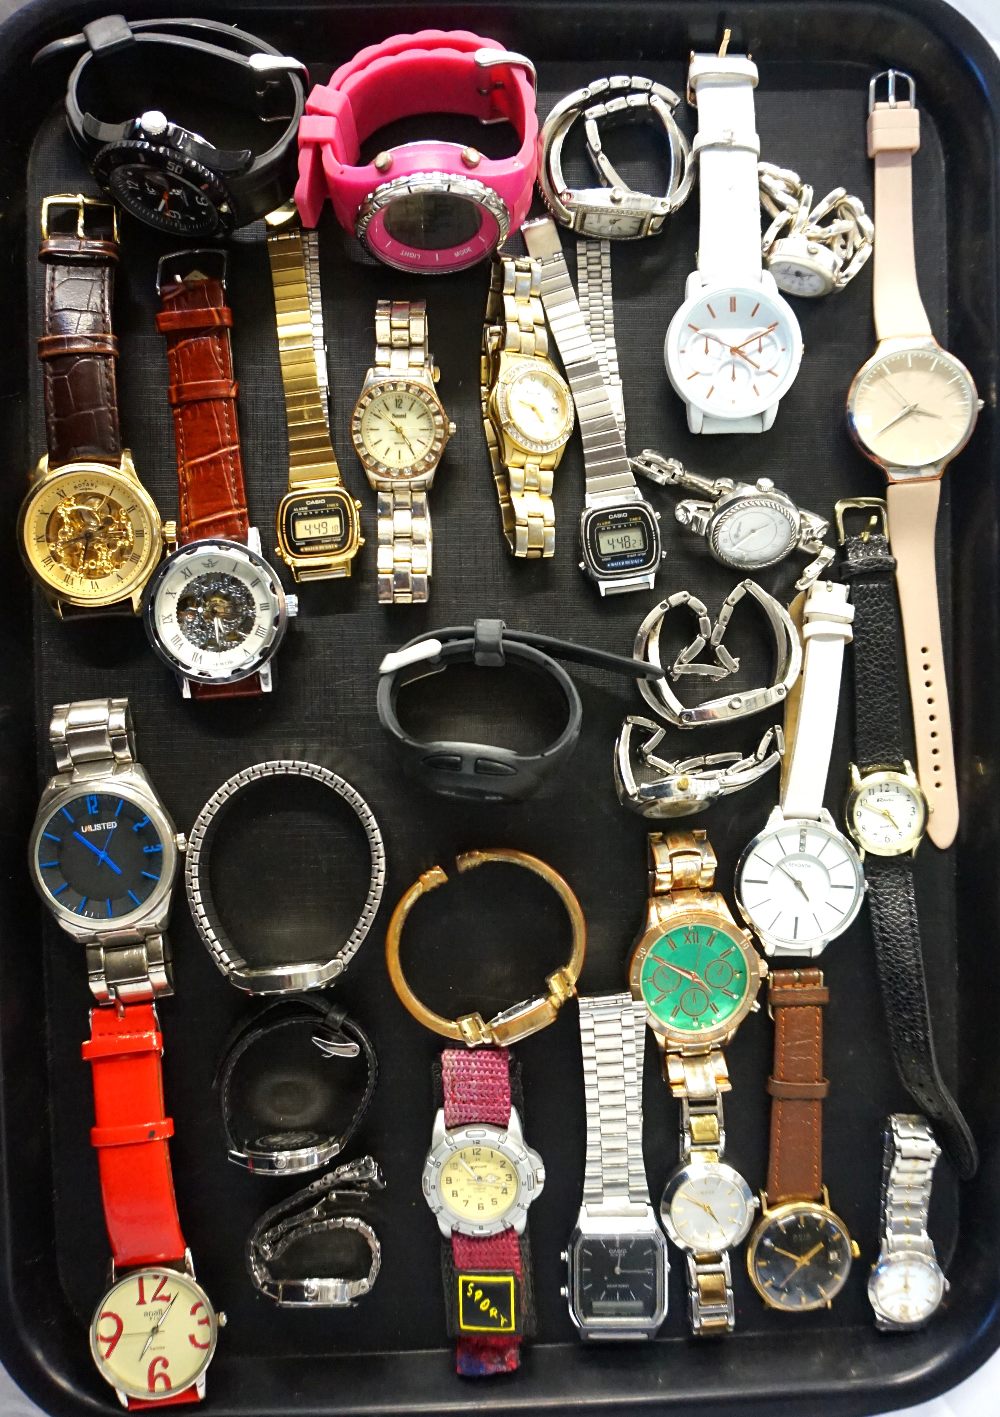 SELECTION OF LADIES AND GENTLEMEN'S WRISTWATCHES including Ice Watch, Rotary, Casio, Accurist, DKNY,